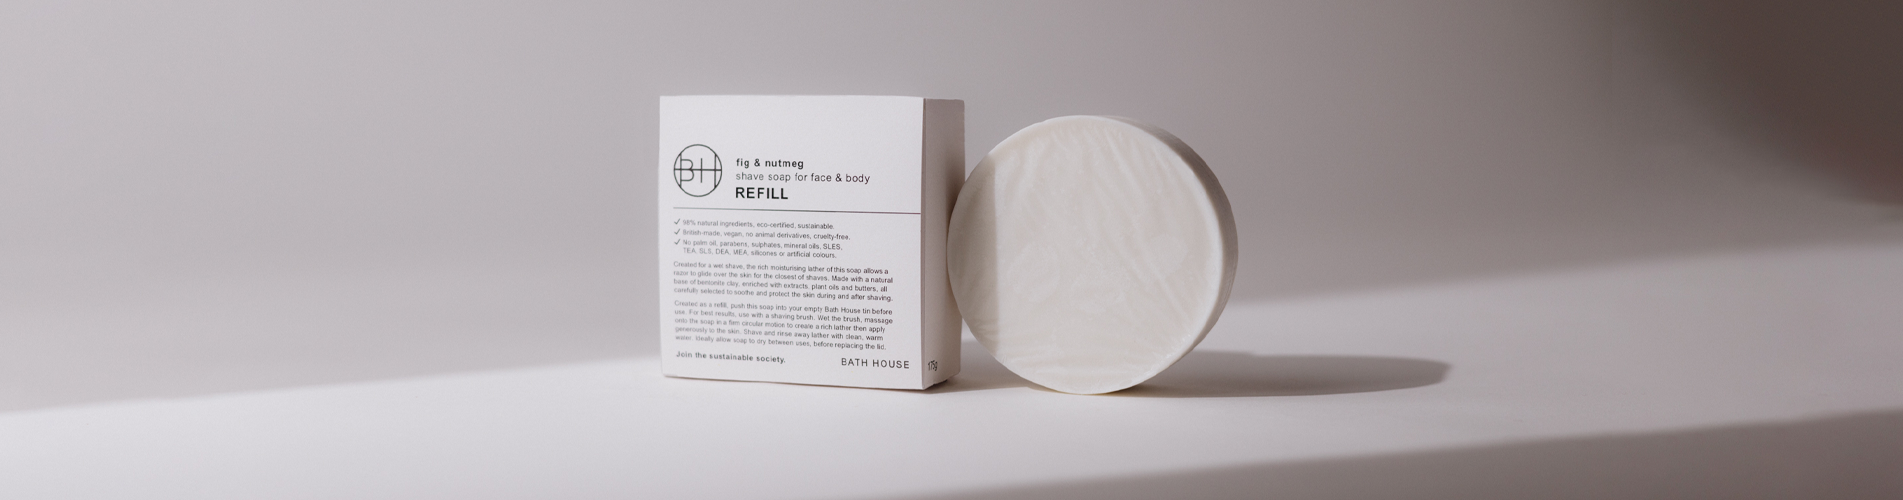 Banner Image Of The Shave Soap Refills Product Category